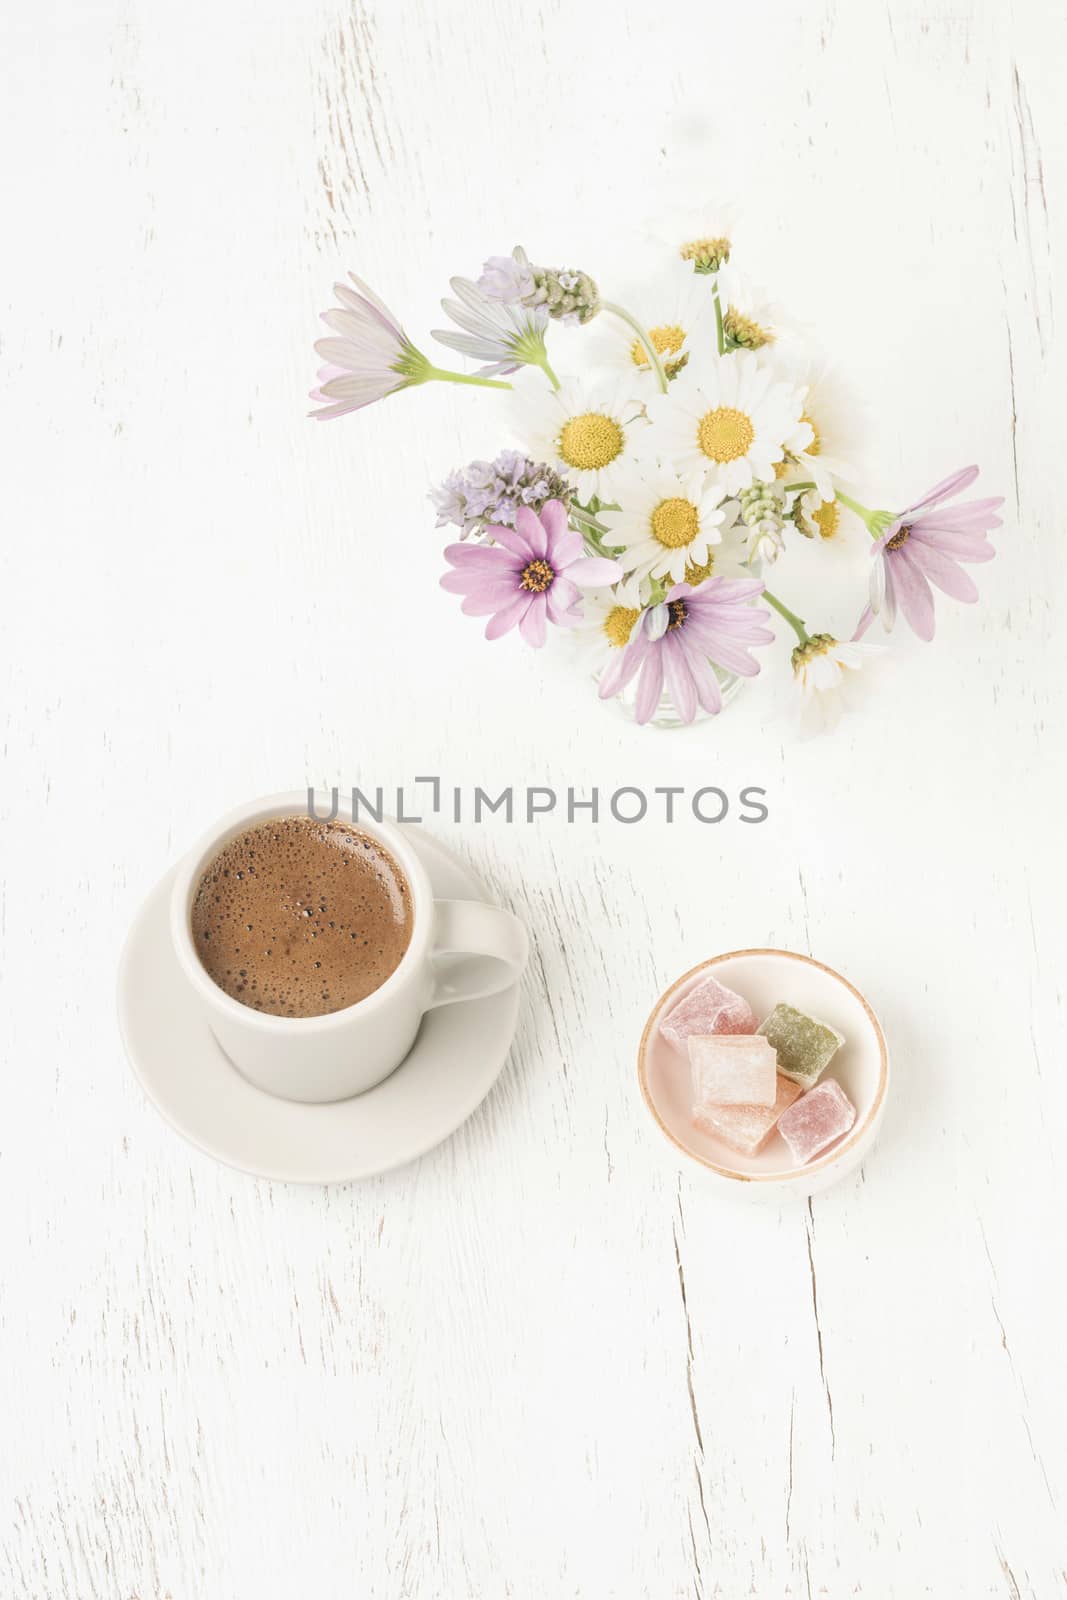 Cup of coffee and Turkish delight on a wooden table with colorful spring flowers on